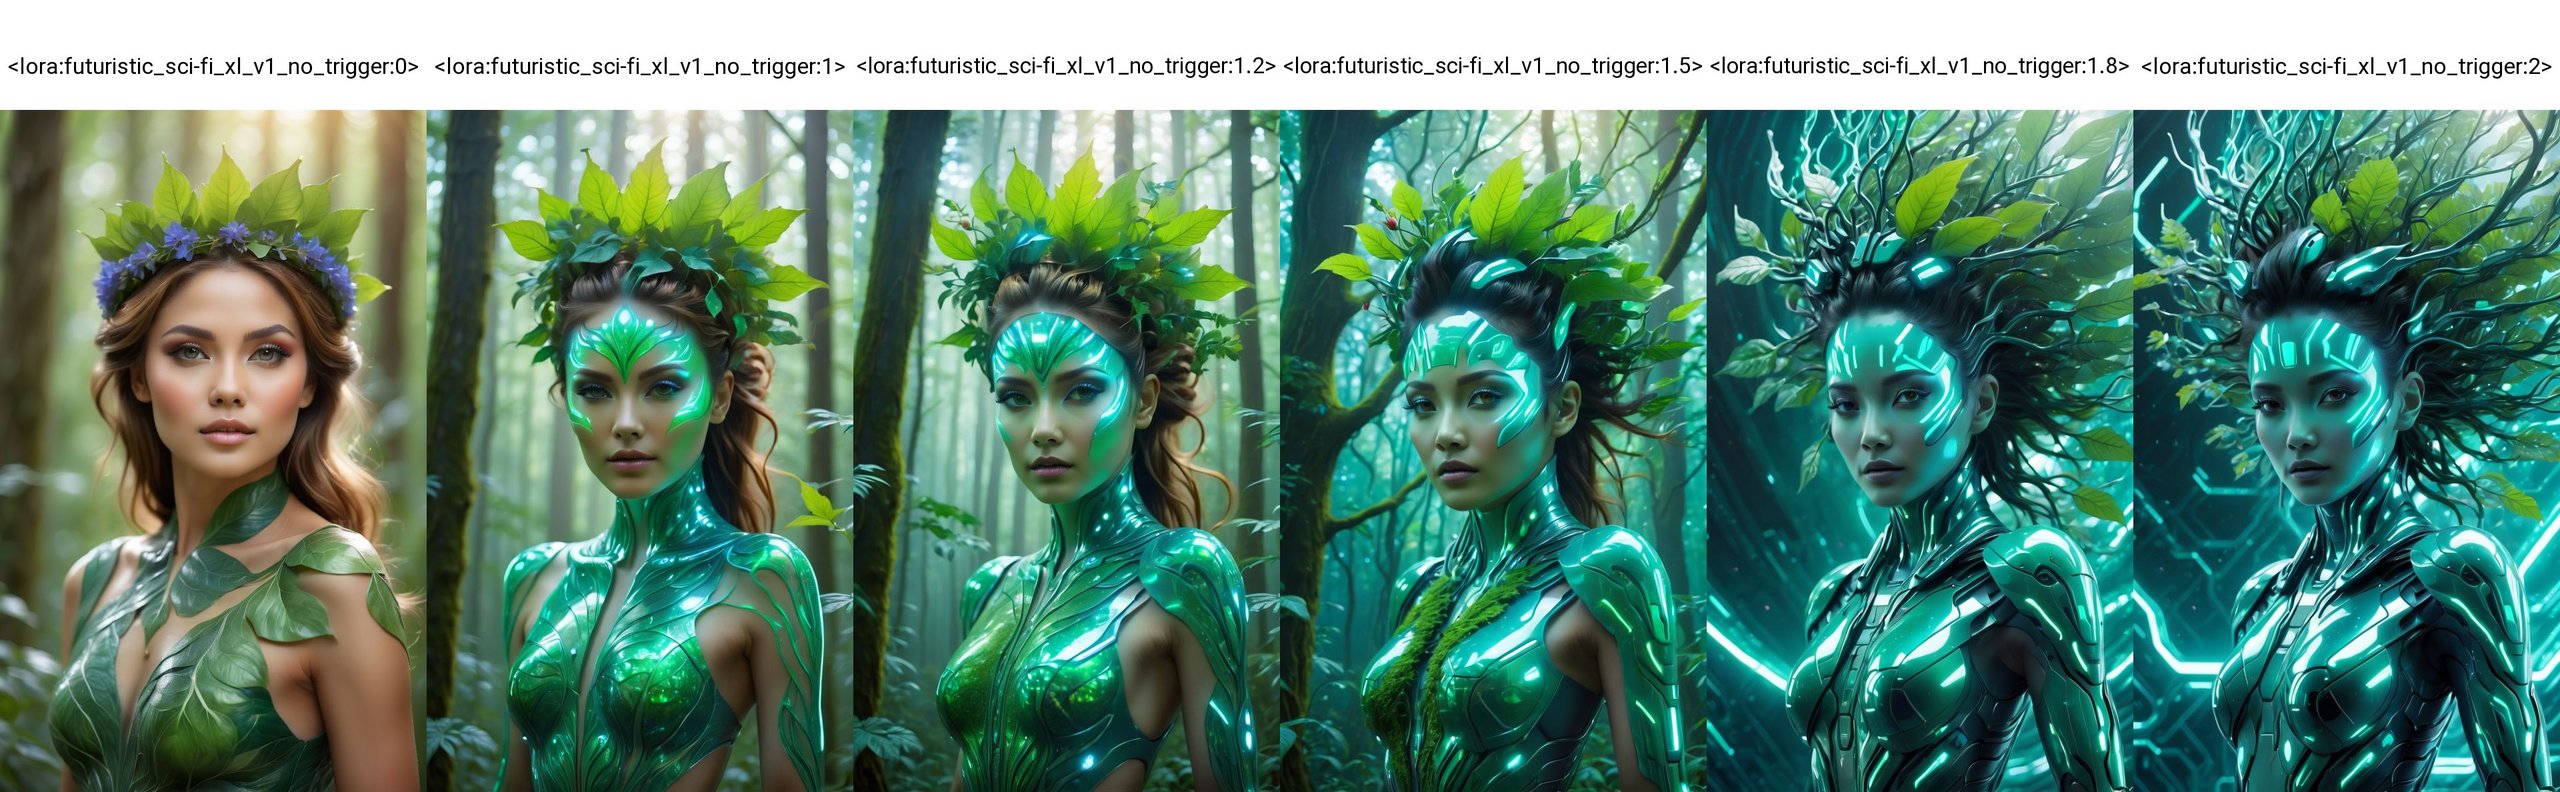 (best quality, 4k, 8k, highres, masterpiece:1.2), ultra-detailed, (realistic, photorealistic, photo-realistic:1.37), nature goddess, leaf body, portrait, greenery, wildflowers, breathtaking eyes, serene expression, graceful pose, ethereal beauty, luminous skin, flowing hair, elegant crown of leaves, soft natural light, vibrant colors, mythical essence, surreal atmosphere, dreamlike aura, harmonious connection with nature, enchanted forest.<lora:futuristic_sci-fi_xl_v1_no_trigger:0>